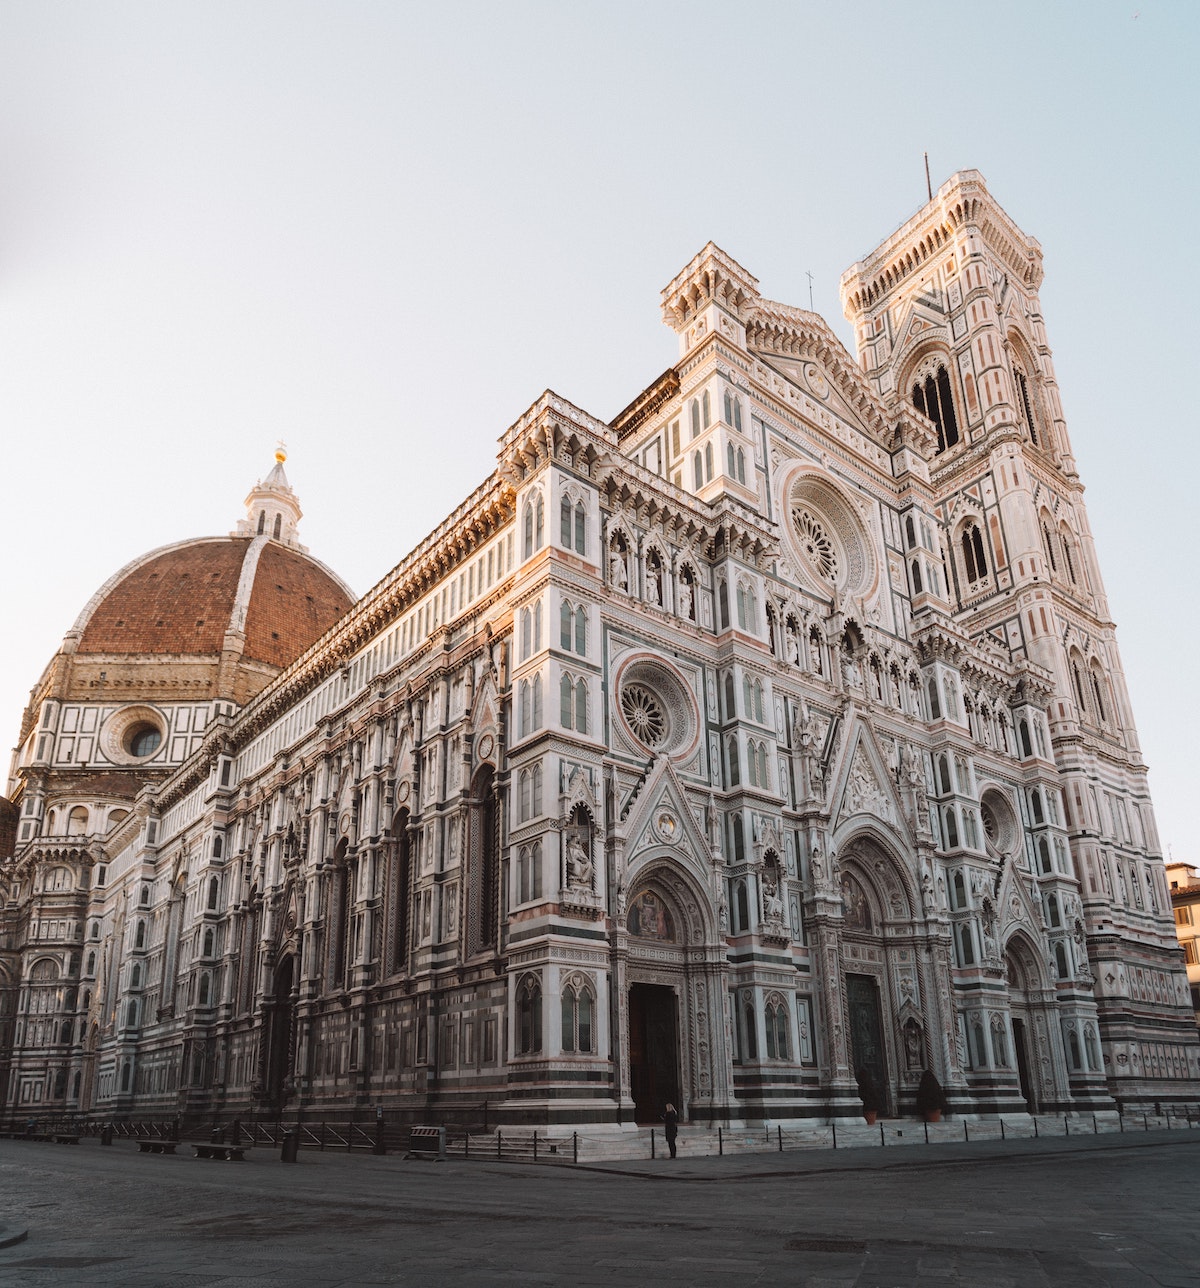 Cathedral in Florence, Italy with a large red dome in the background